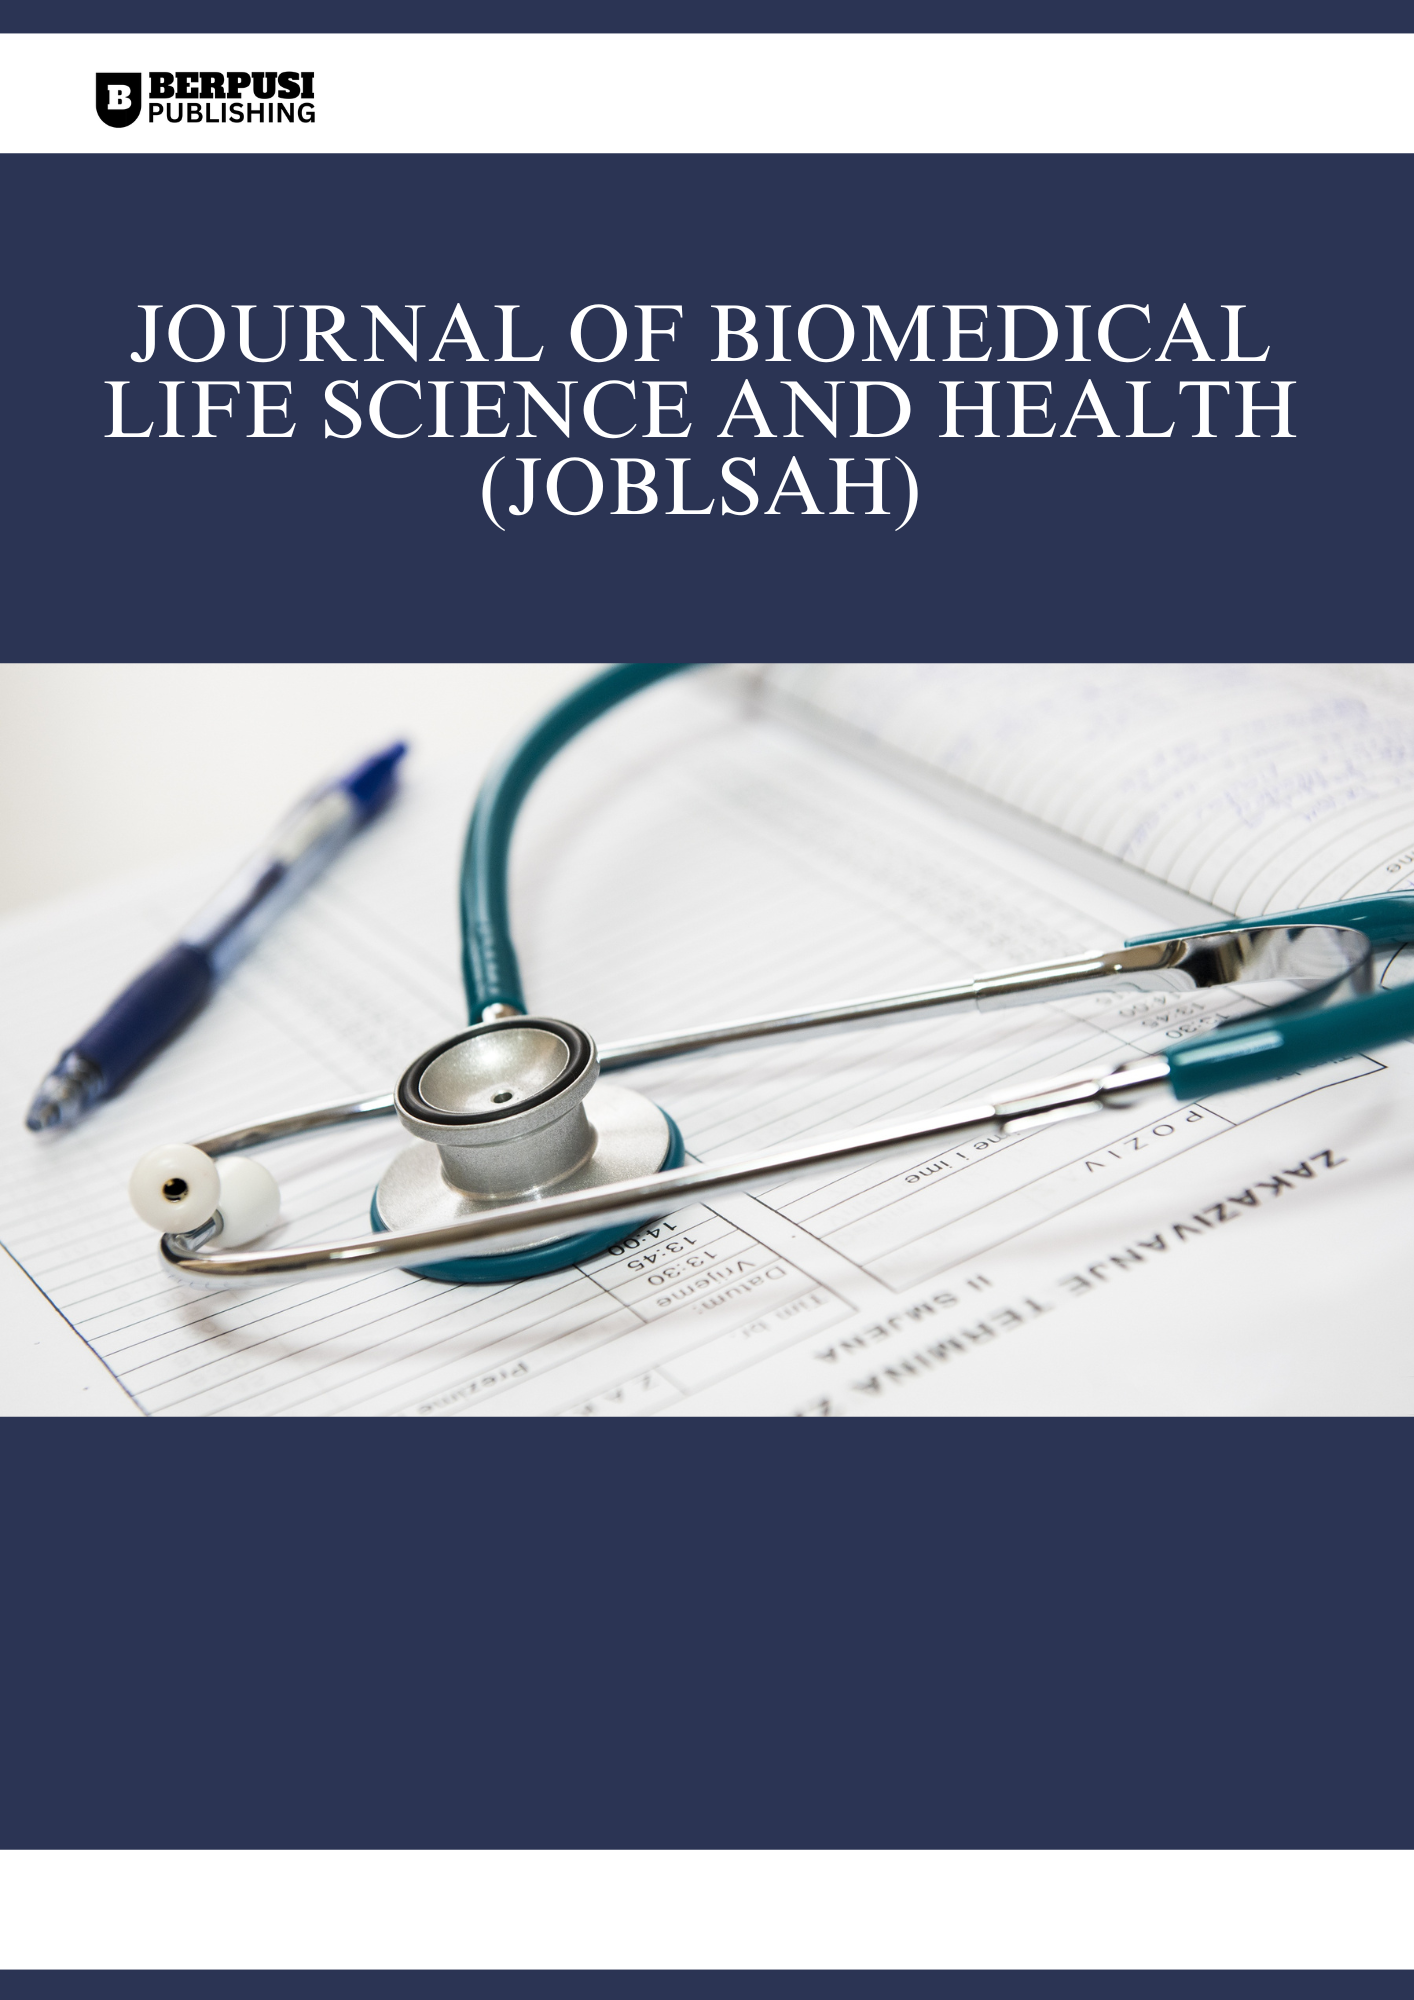 					View Vol. 1 No. 1 (2023): (On Process Published) Journal of Biomedical Life Science and Health 
				